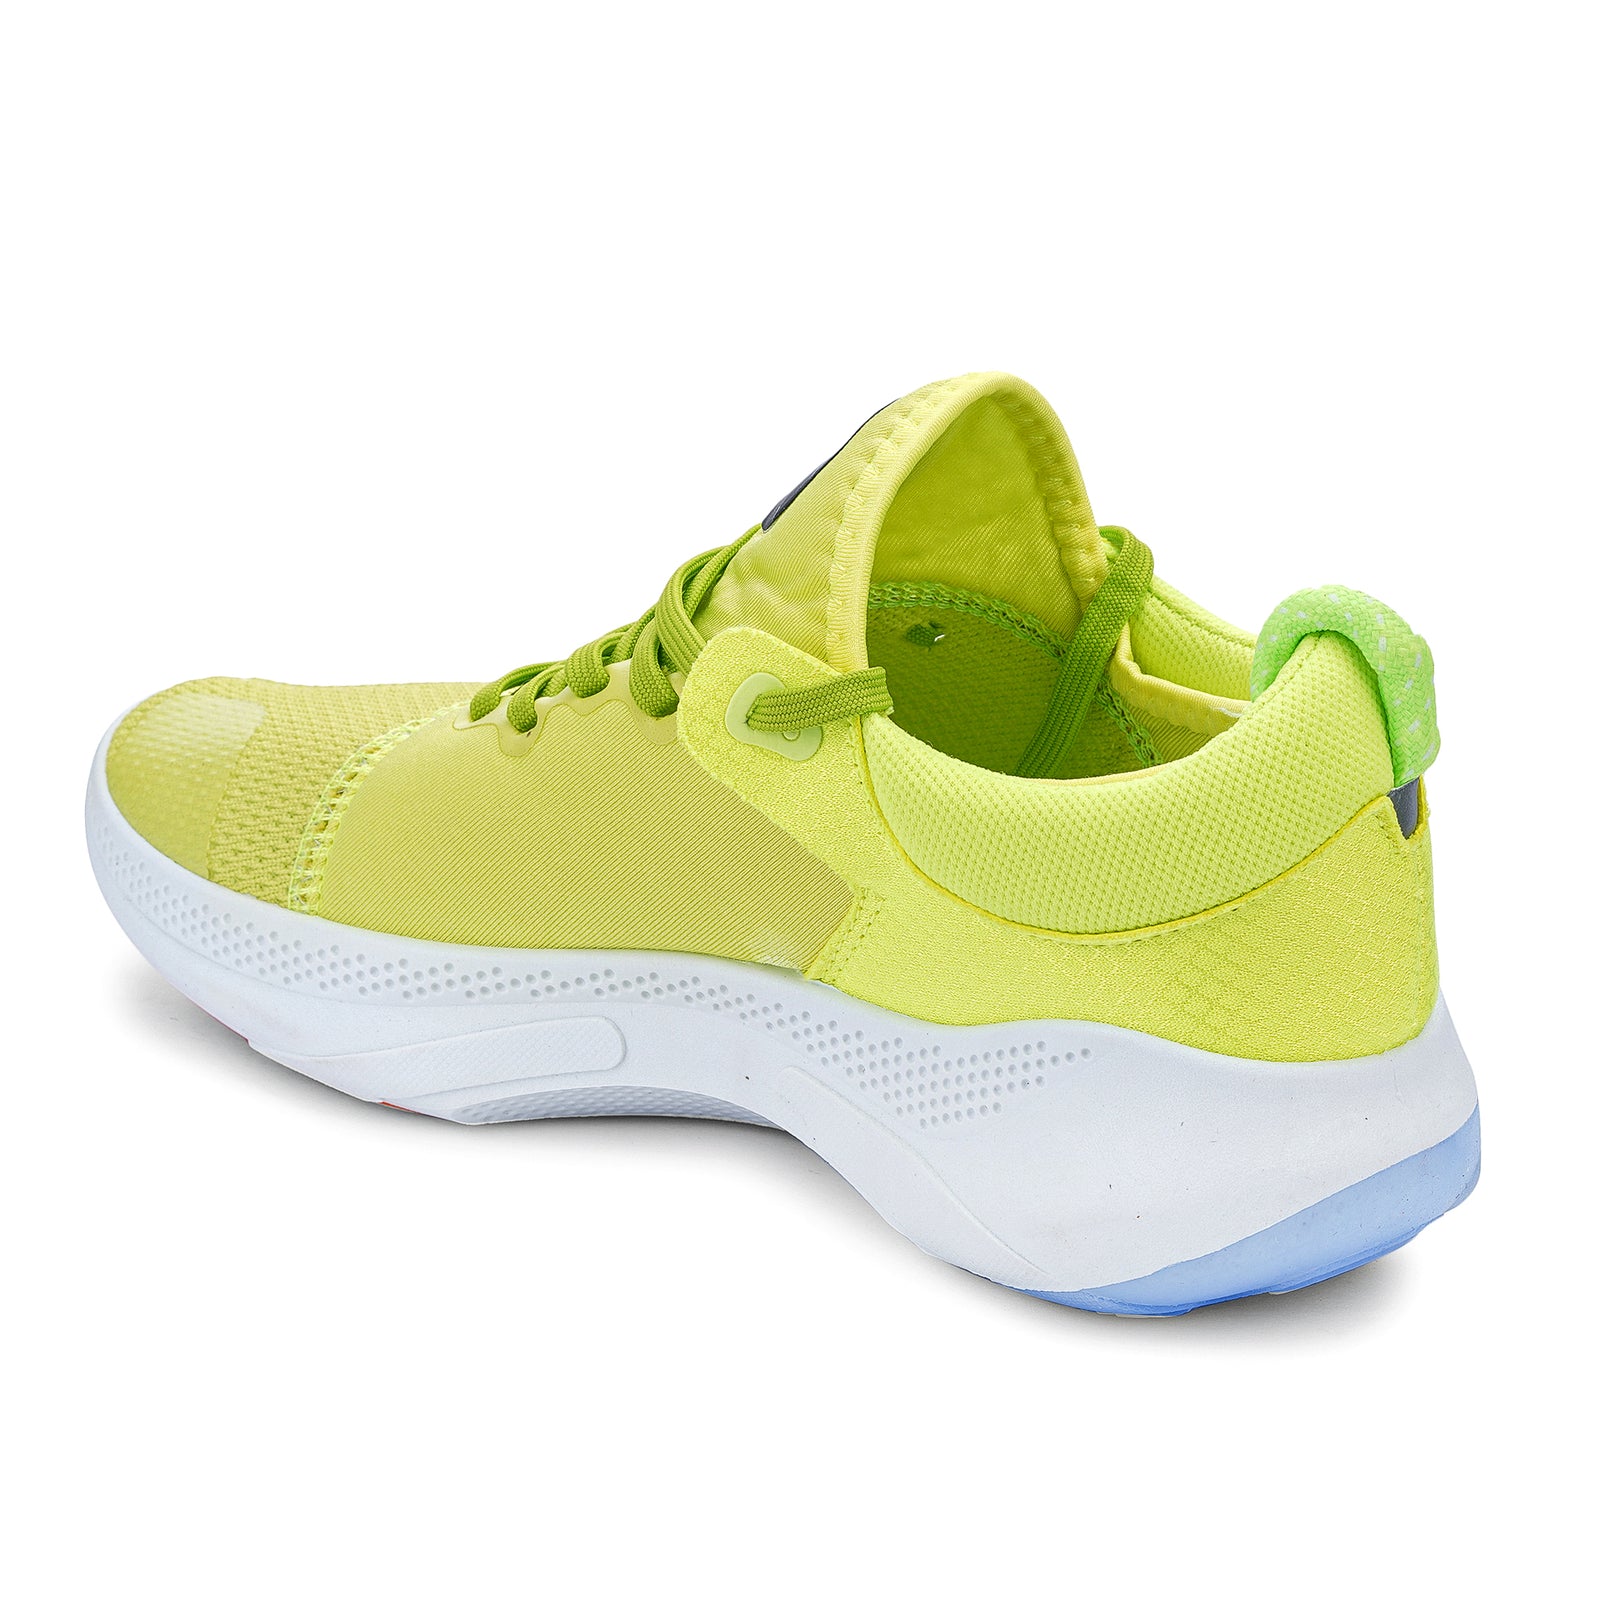 Green Solid Mesh Lace Up Sneakers For Men